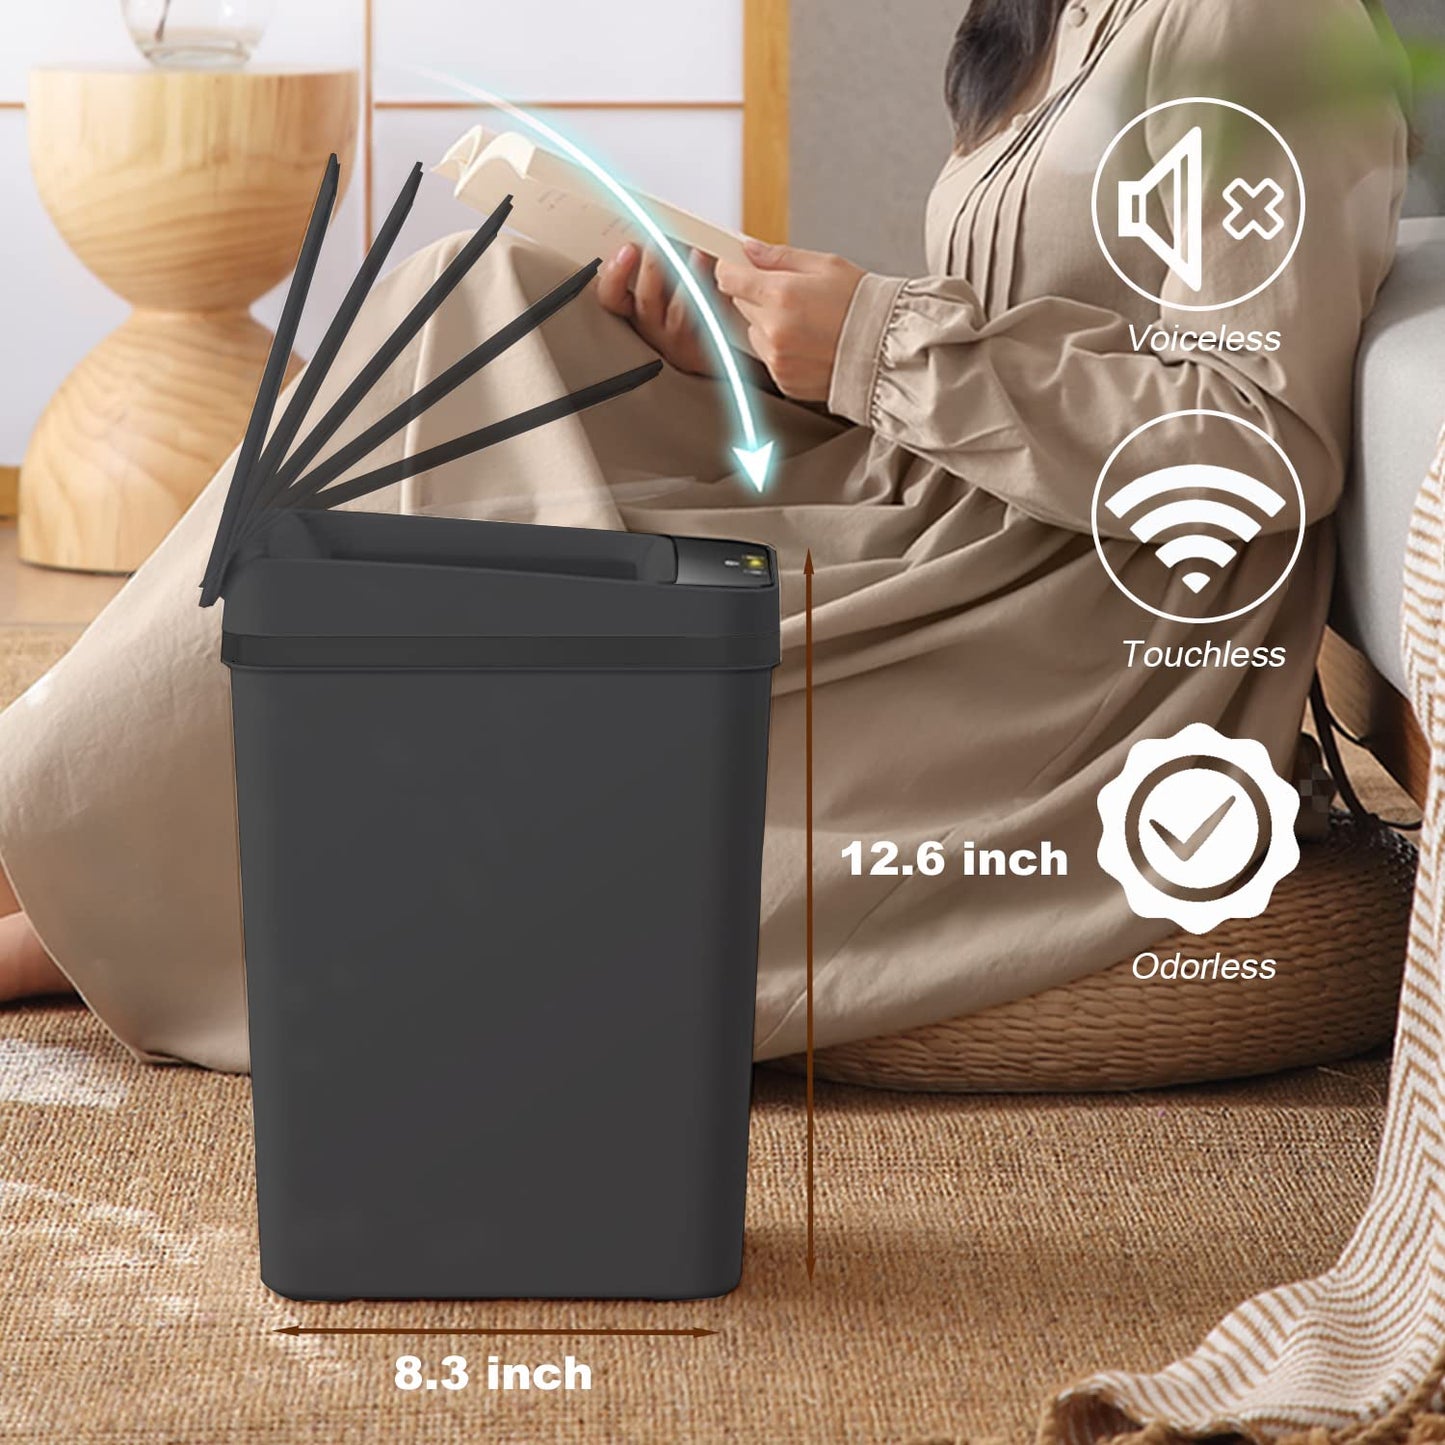 2.5 Gallon Touchless Bathroom Trash Can - Smart Motion Sensor, Skinny Design with Lid - Electric, Plastic, Auto Open - Small Slim Automatic Garbage Can (Black)